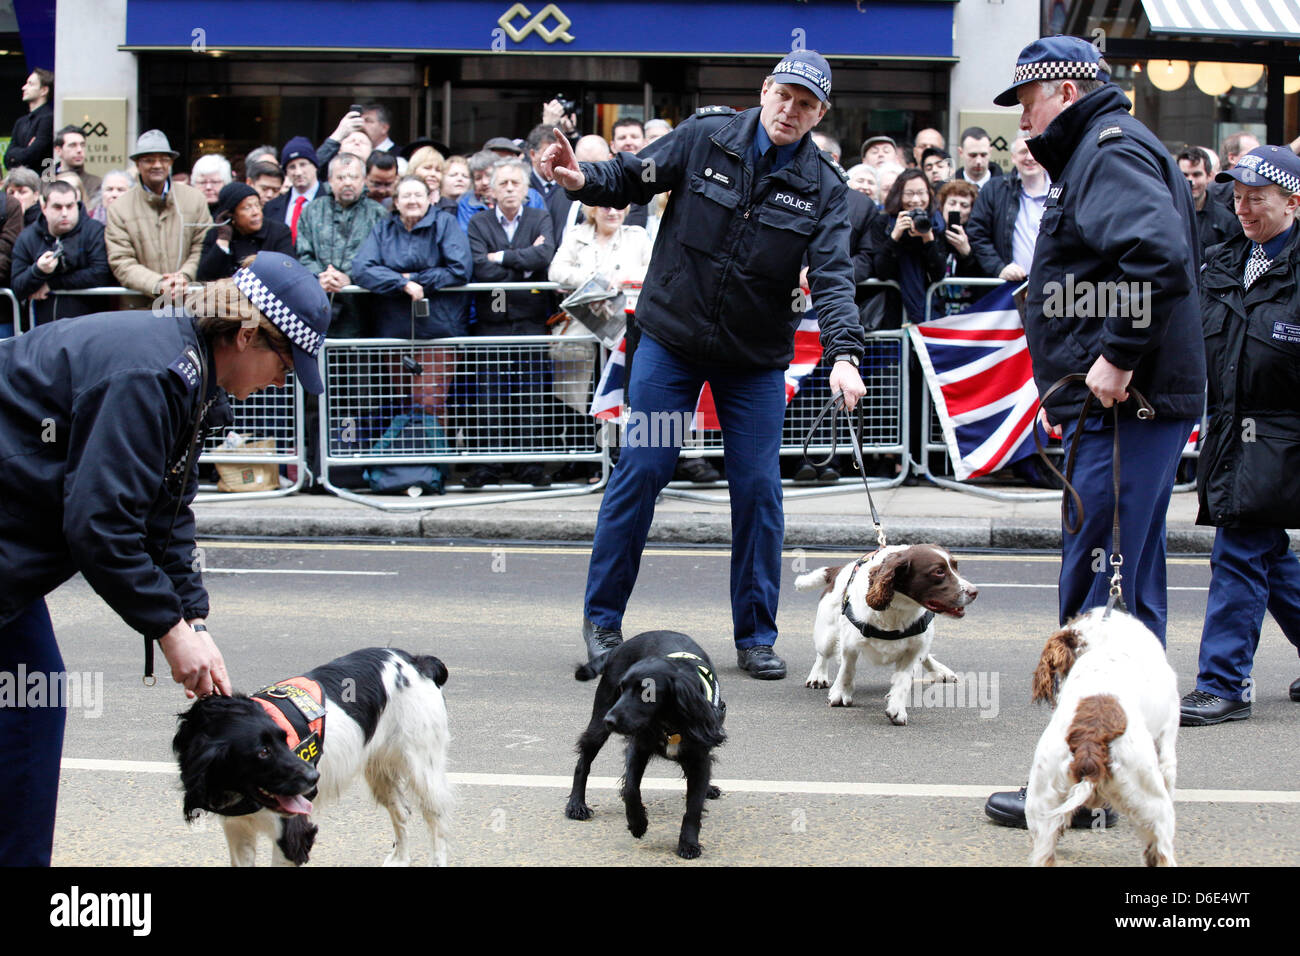 London, UK. 17th of April 2013.  The funeral of former prime minister Margaret Thatcher was held at St. Paul's Cathedral this morning. Police supervision was extremely strict as police dogs searched up and down Ludgate Hill. Credit: Lydia Pagoni/Alamy Live News Stock Photo